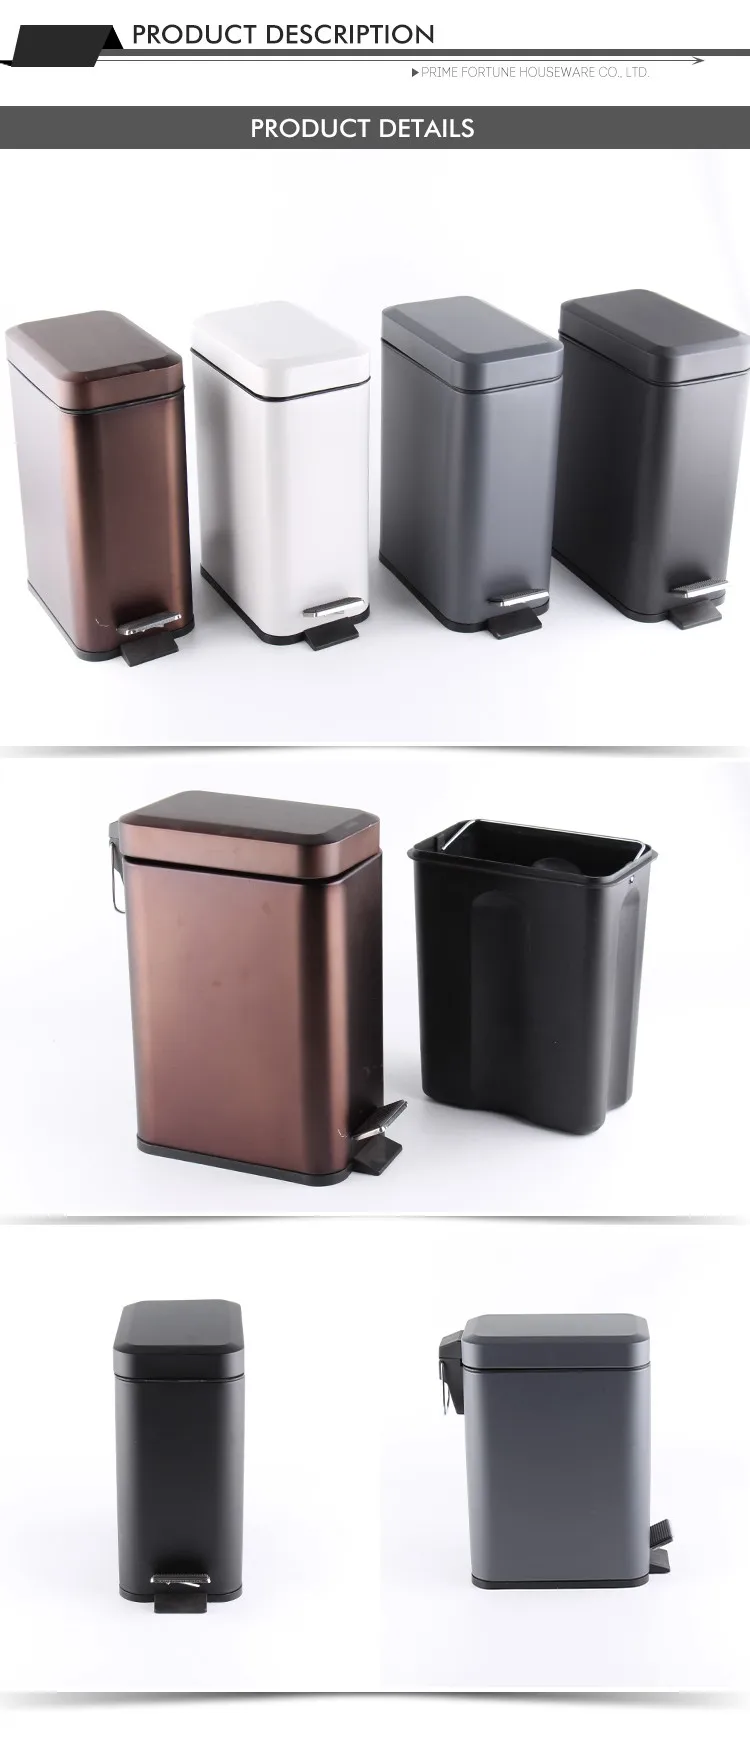 Square soft close stainless steel Pedal Trash Bin with powder coating